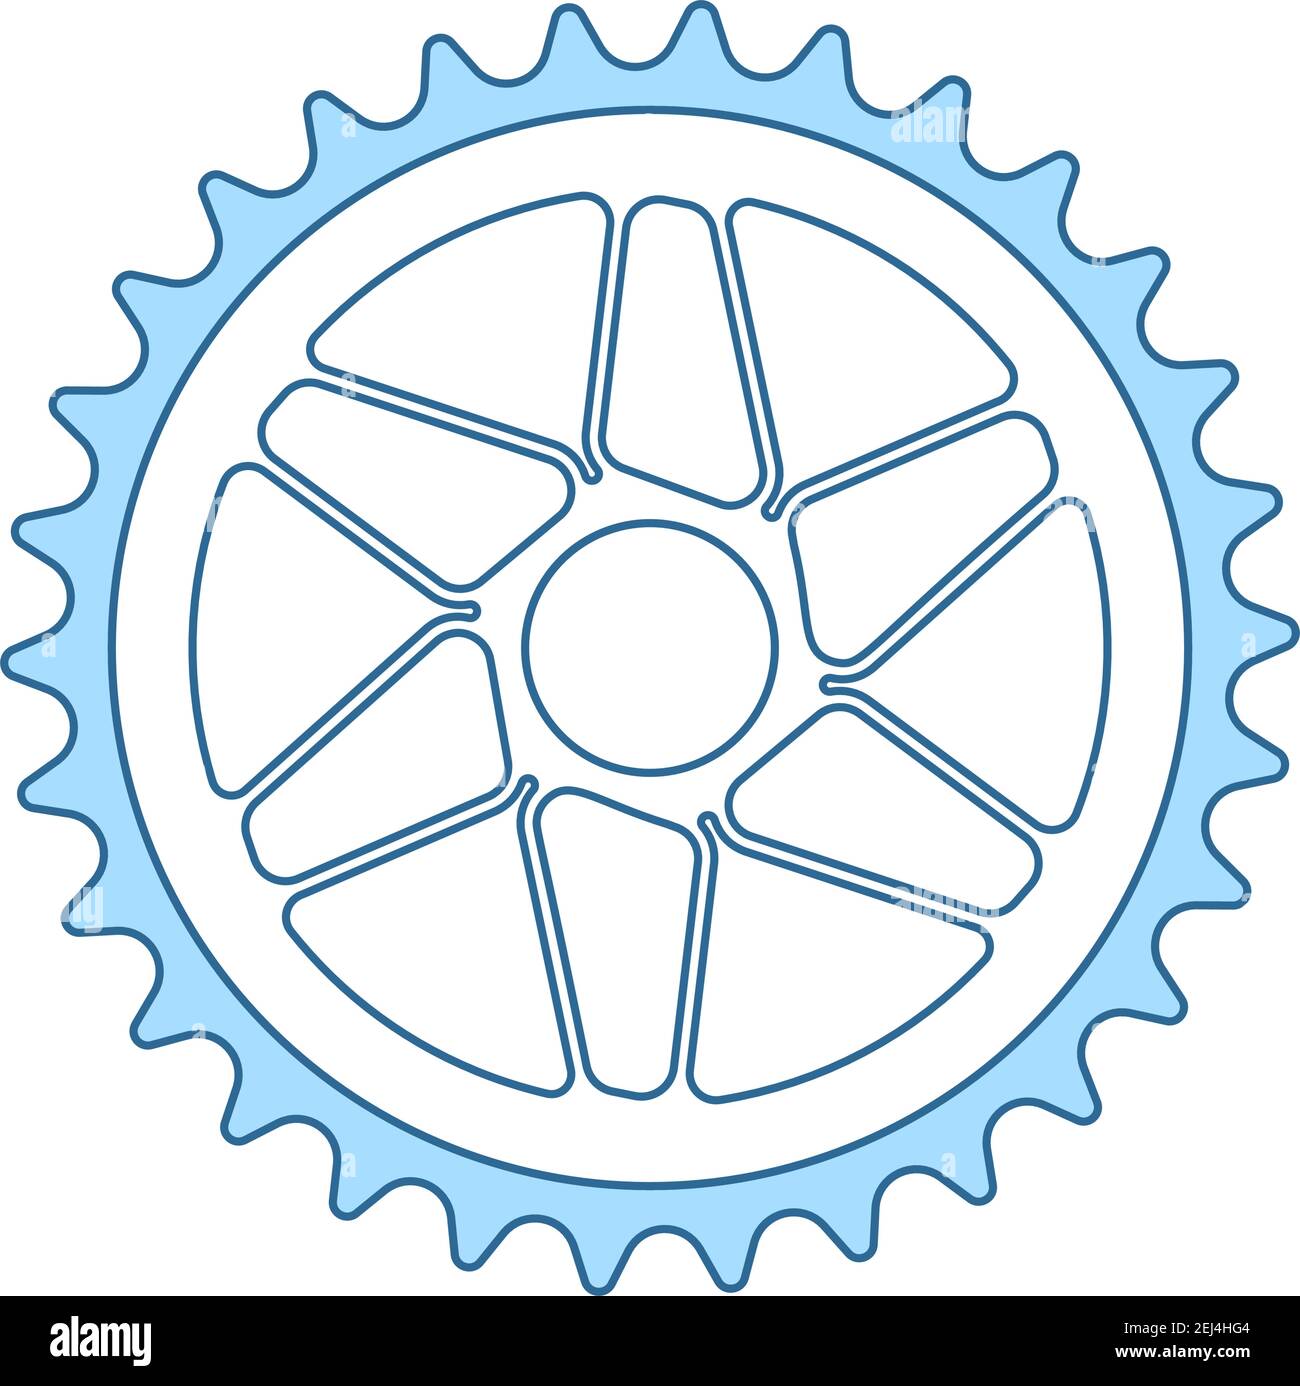 Bike Gear Star Icon. Thin Line With Blue Fill Design. Vector Illustration. Stock Vector